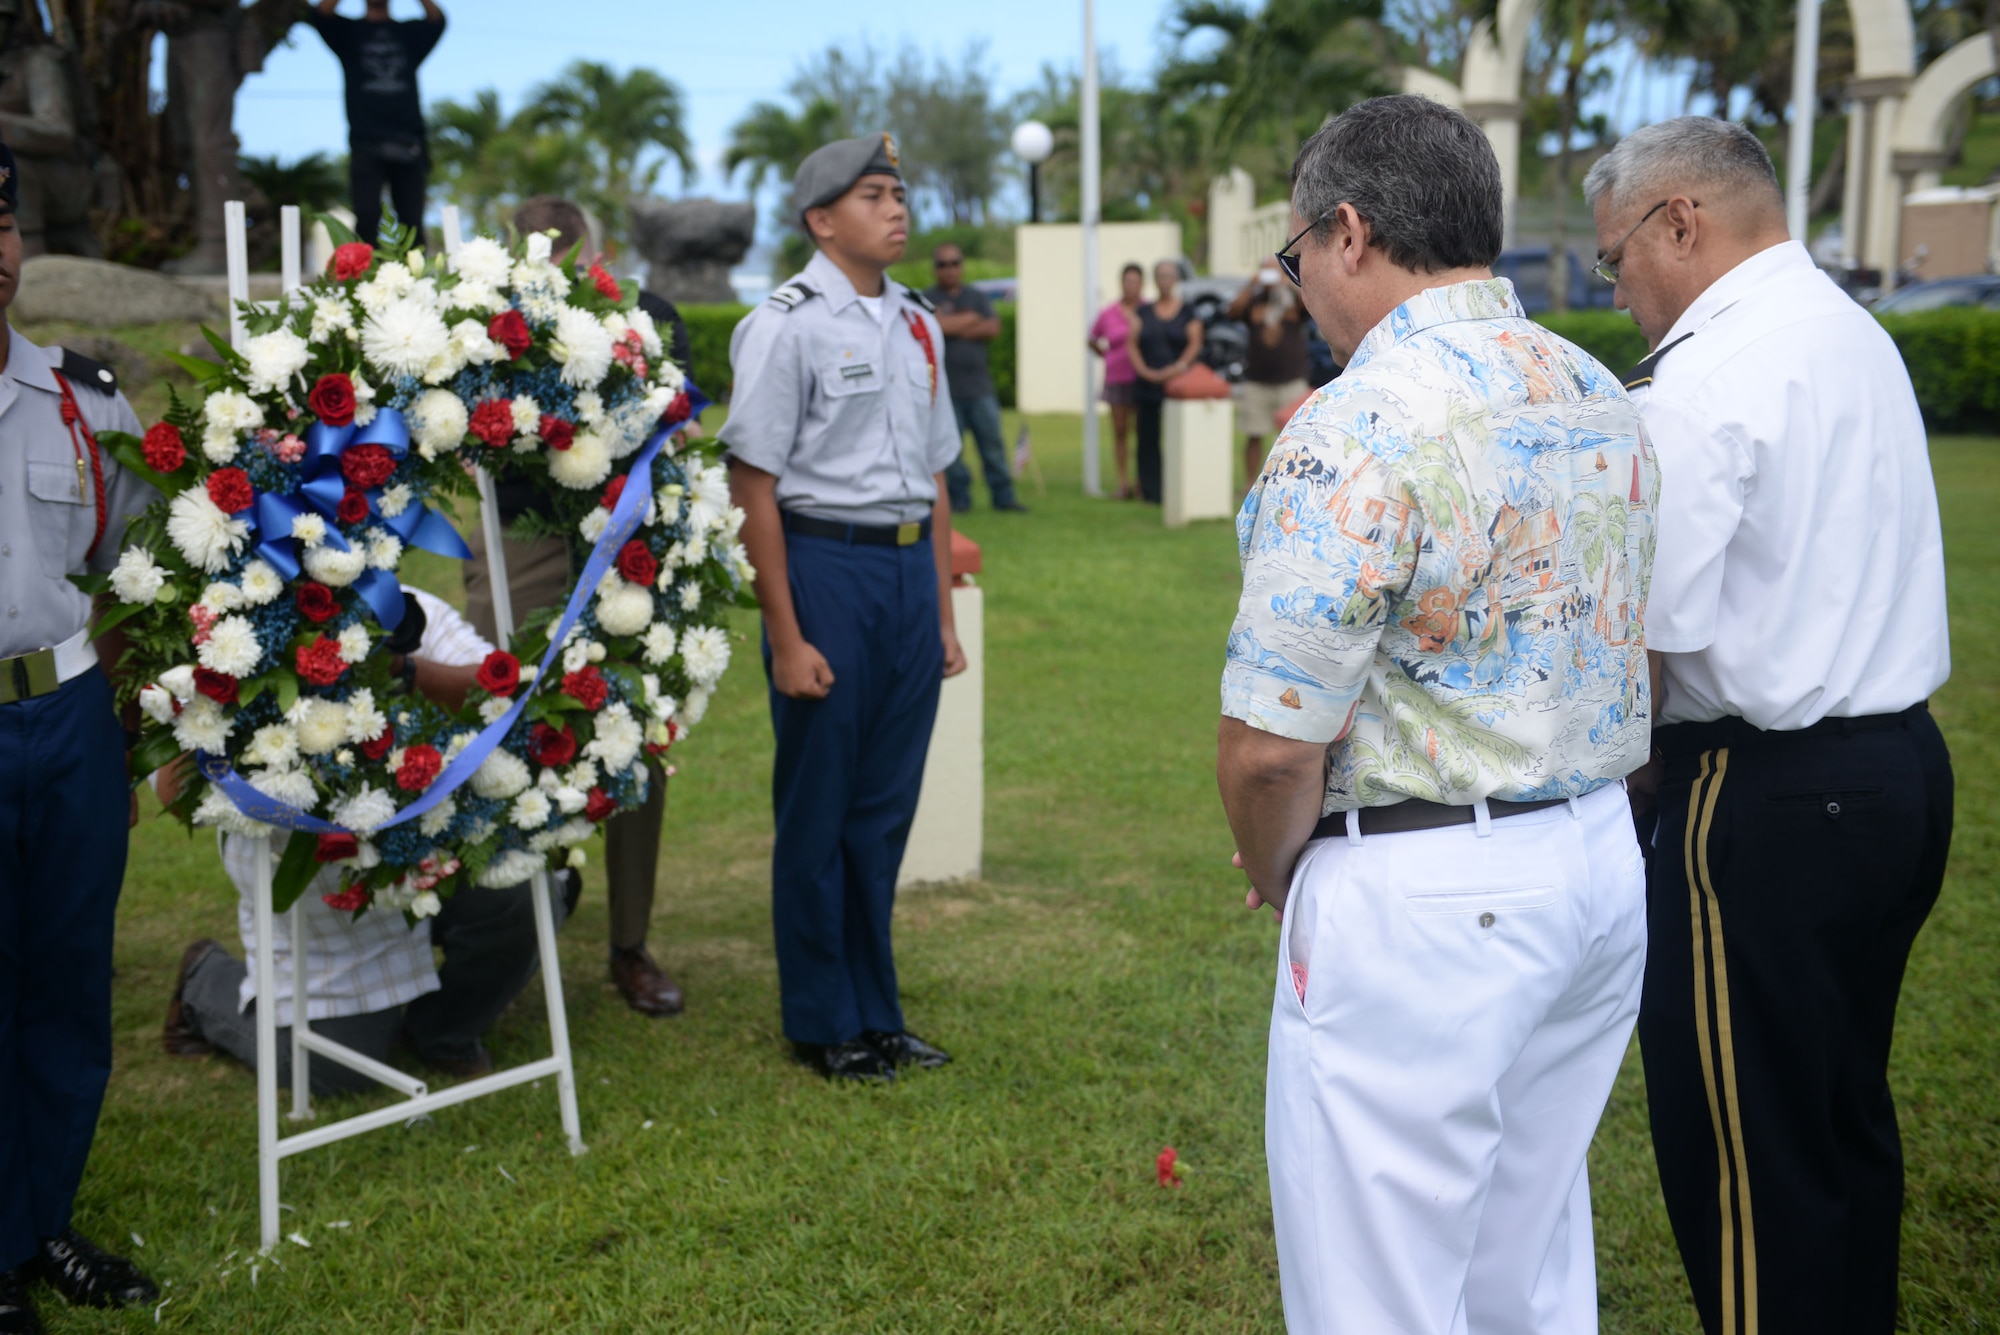 Eddie Calvo, governor of Guam, and Brig. Gen. Leon Guerrero, Guam National Guard adjutant general, pays respect to fallen veterans during the 2015 Veterans Day ceremony Nov. 11 in Adelup, Guam. Veterans Day honors and recognizes the personal sacrifices put forth by previous generations of servicemembers and our current servicemembers.  (U.S. Air Force photo by Senior Airman Joshua Smoot/Released)